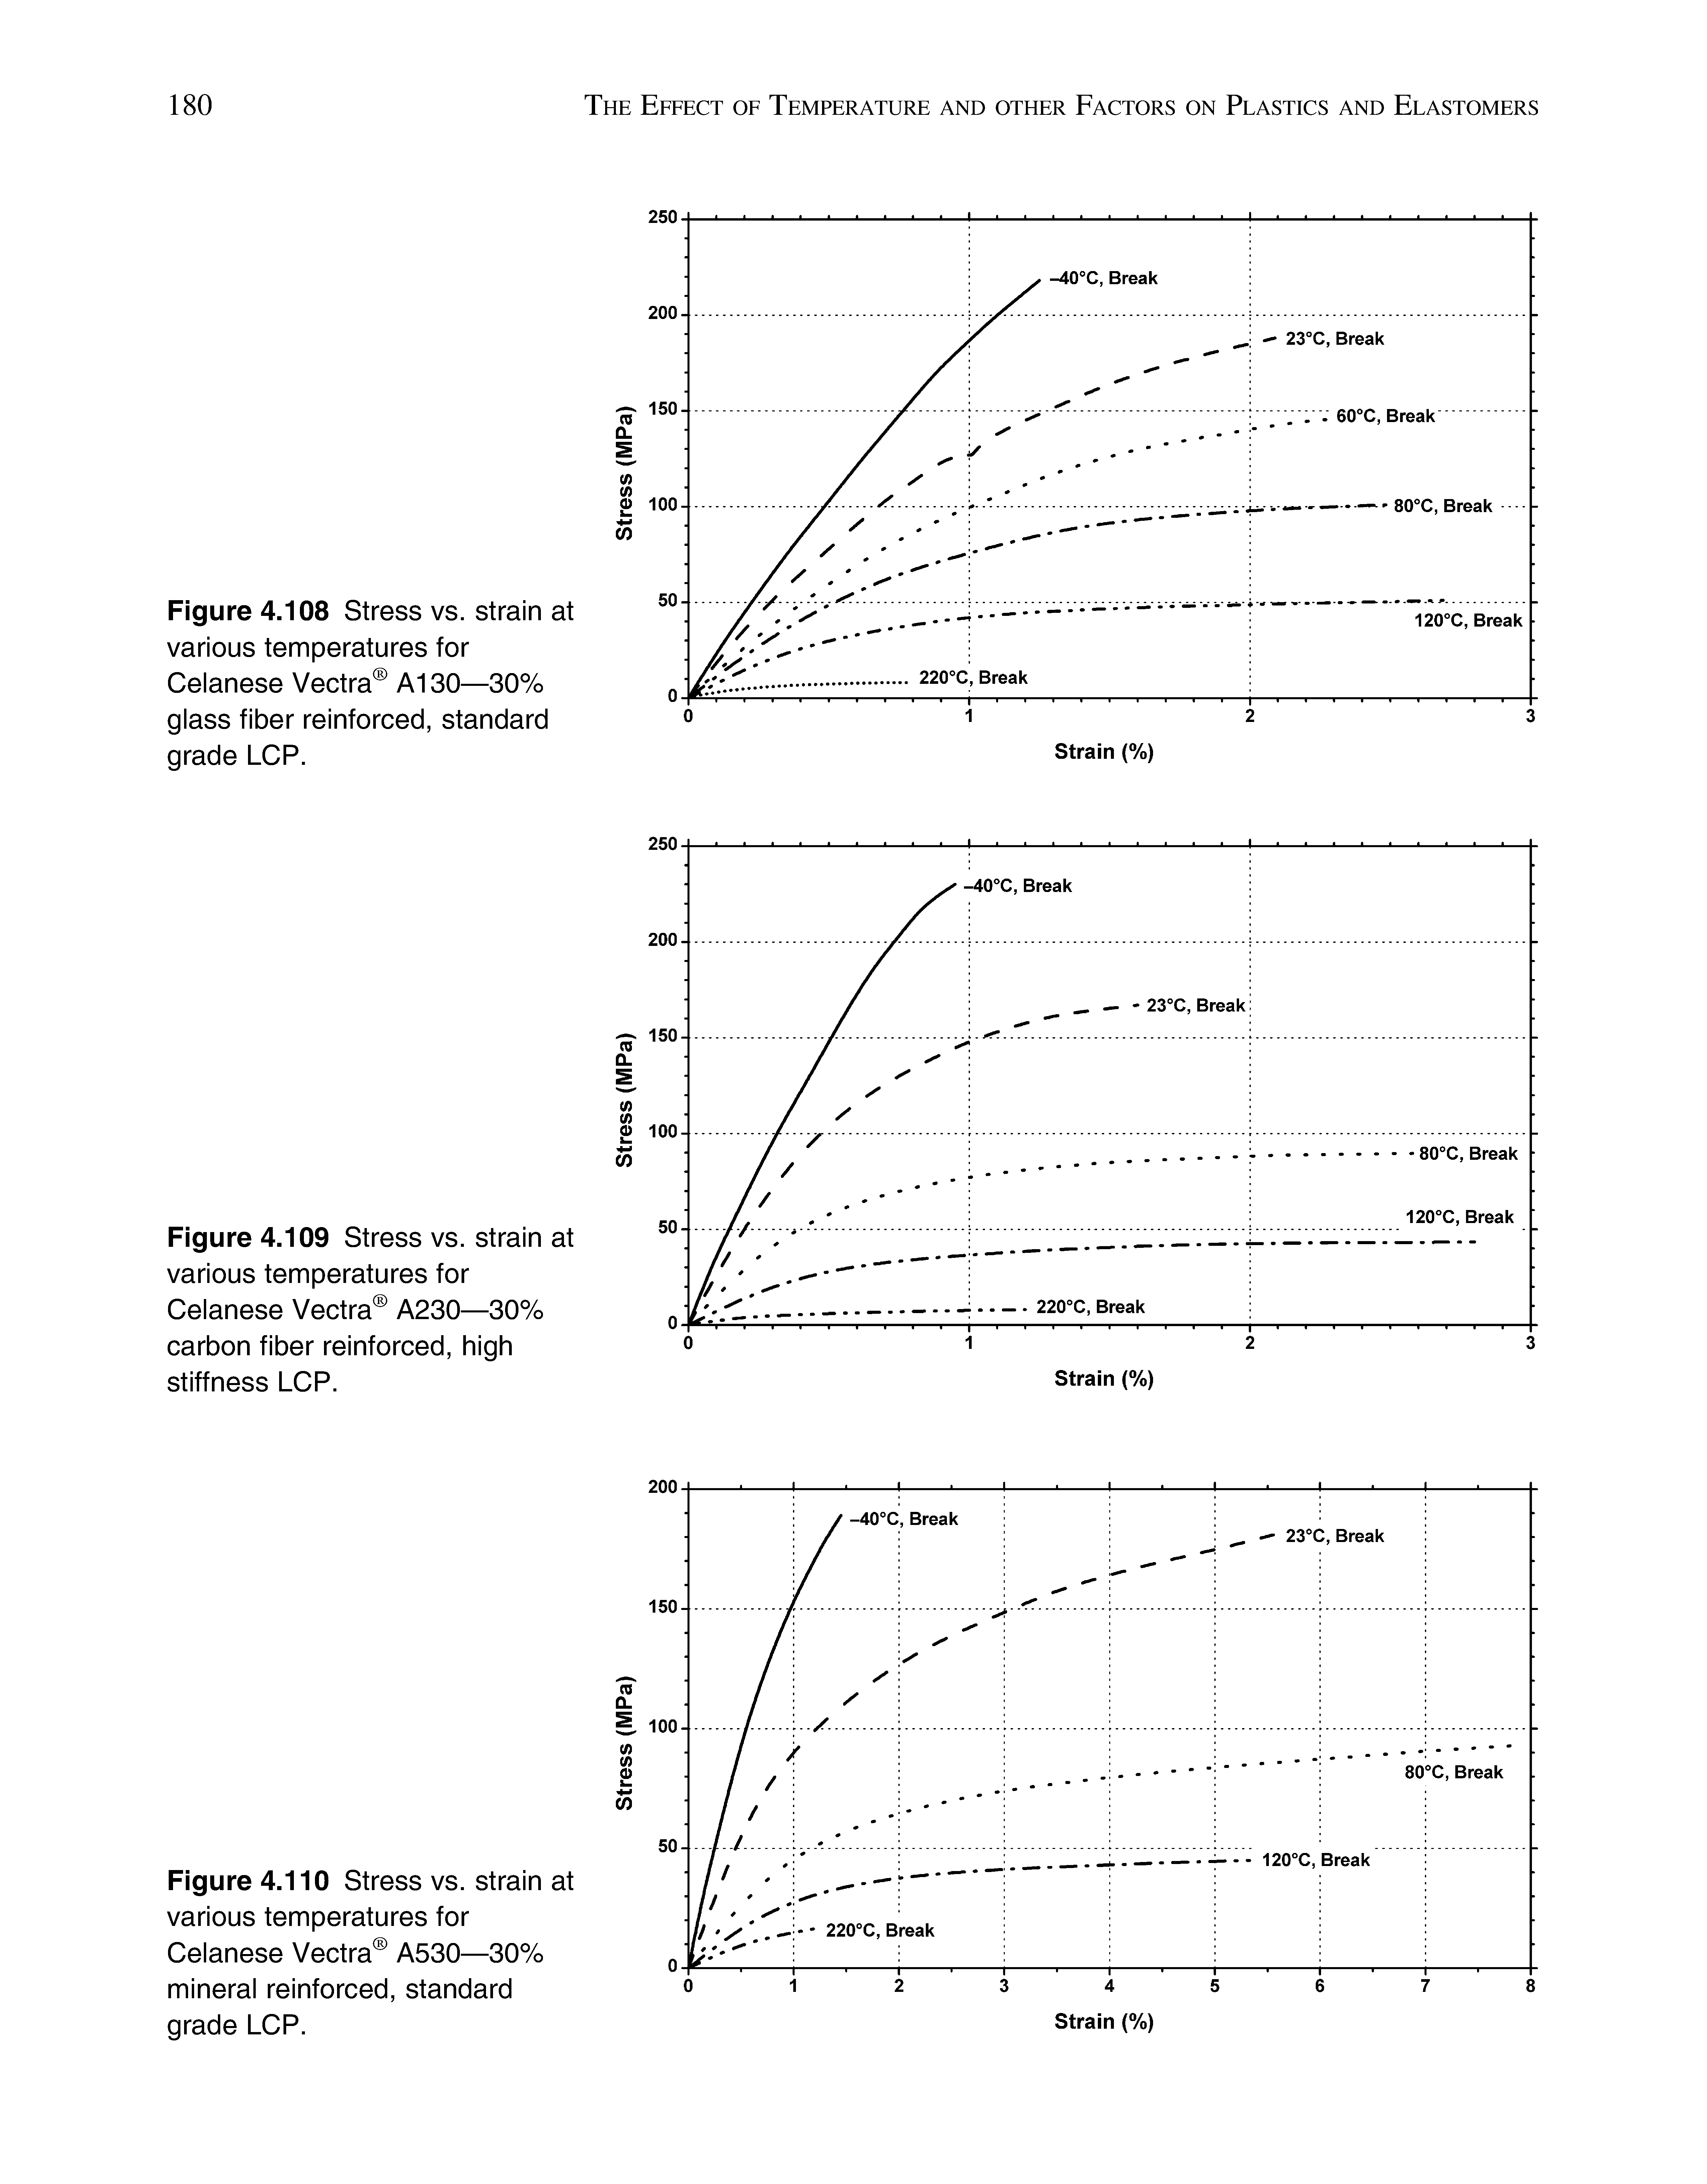 Figure 4.108 Stress vs. strain at various temperatures for Celanese Vectra A130—30% glass fiber reinforced, standard grade LCP.